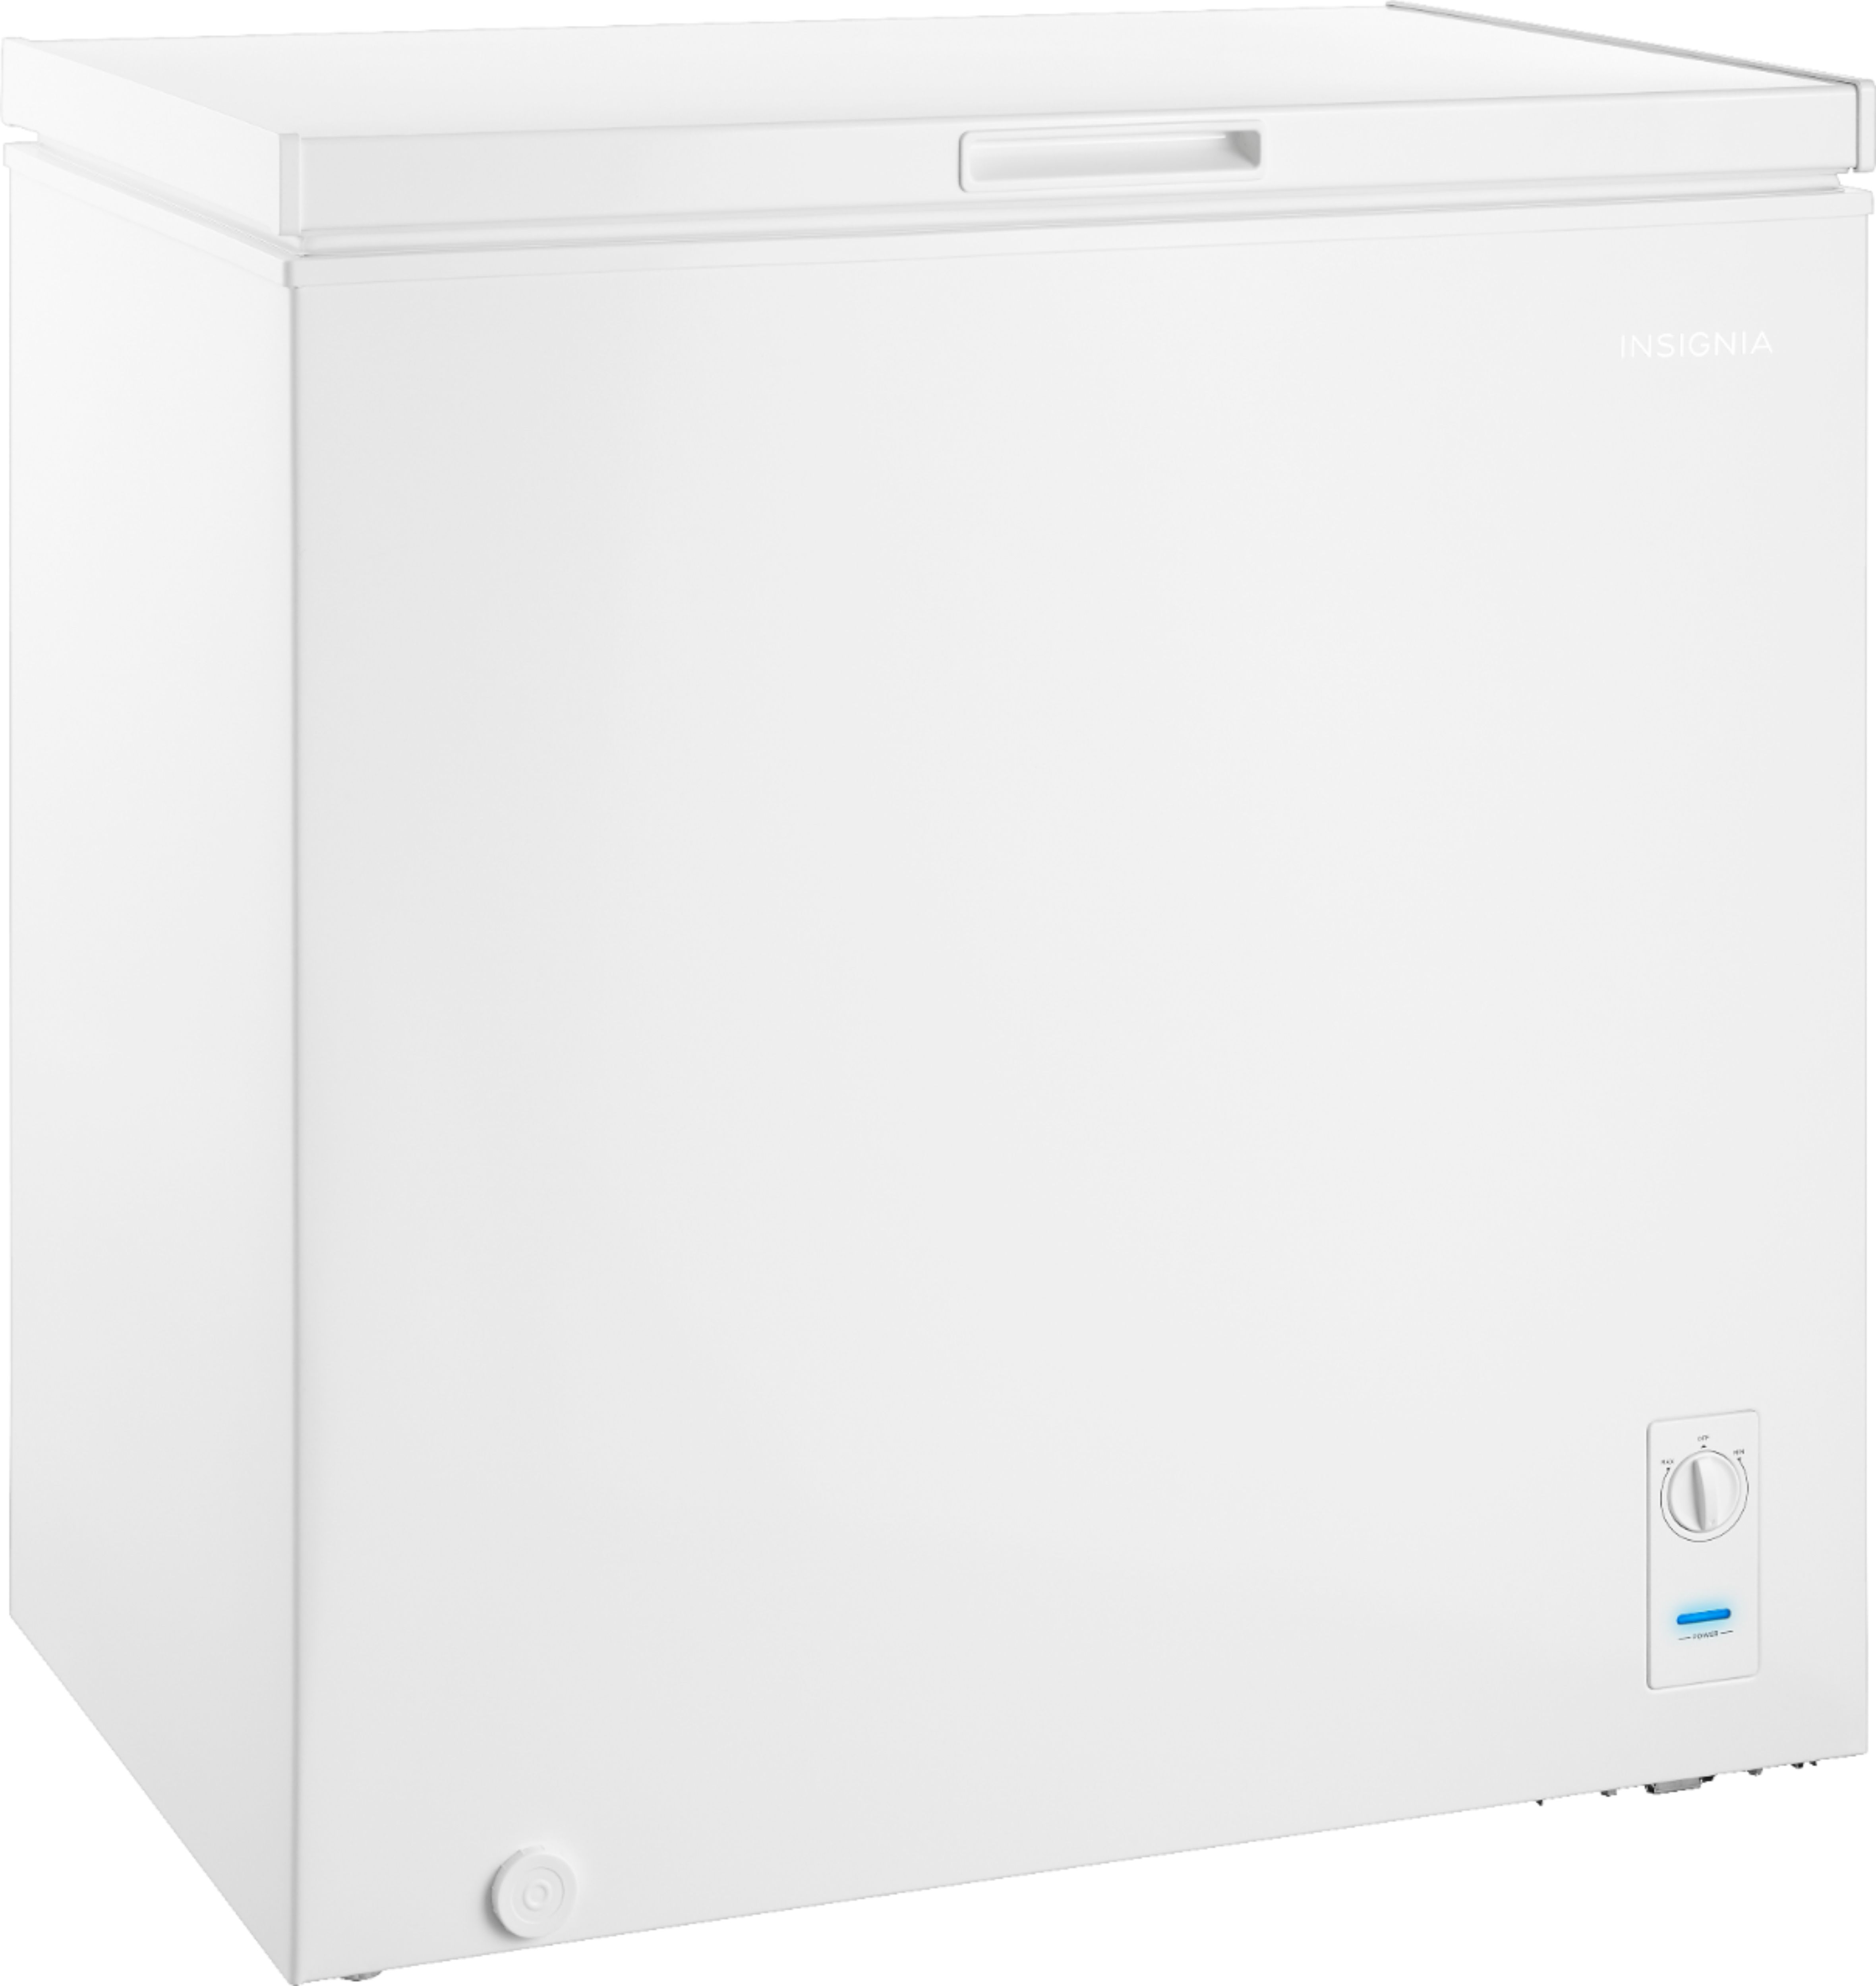 Angle View: Viking - Professional 7 Series 12.8 Cu. Ft. Upright Freezer with Interior Light - Slate Blue